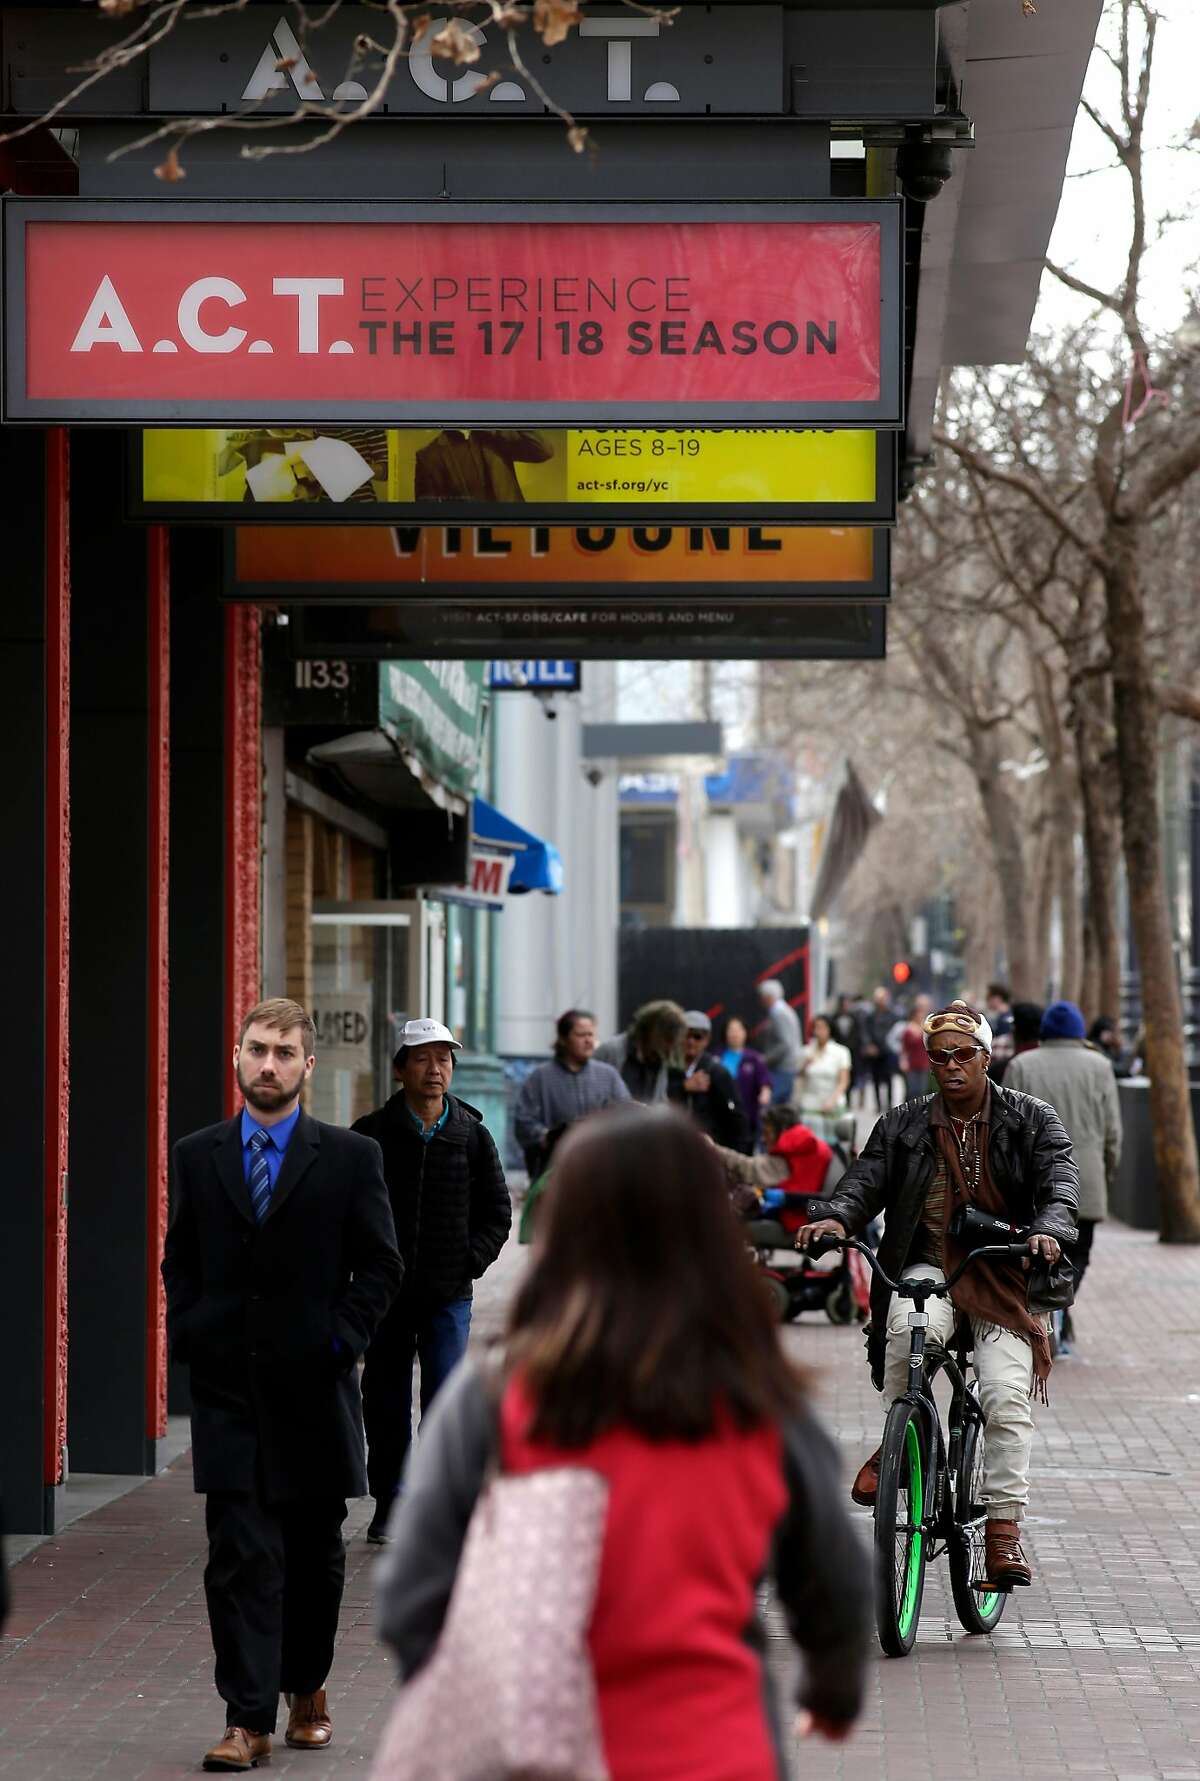 The American Conservatory Theater in San Francisco, Calif., seen on Wednesday Feb. 14, 2018. The A.C.T. faces quality of life issues with it's location in the heart of Market st. between 7th and 8th streets.